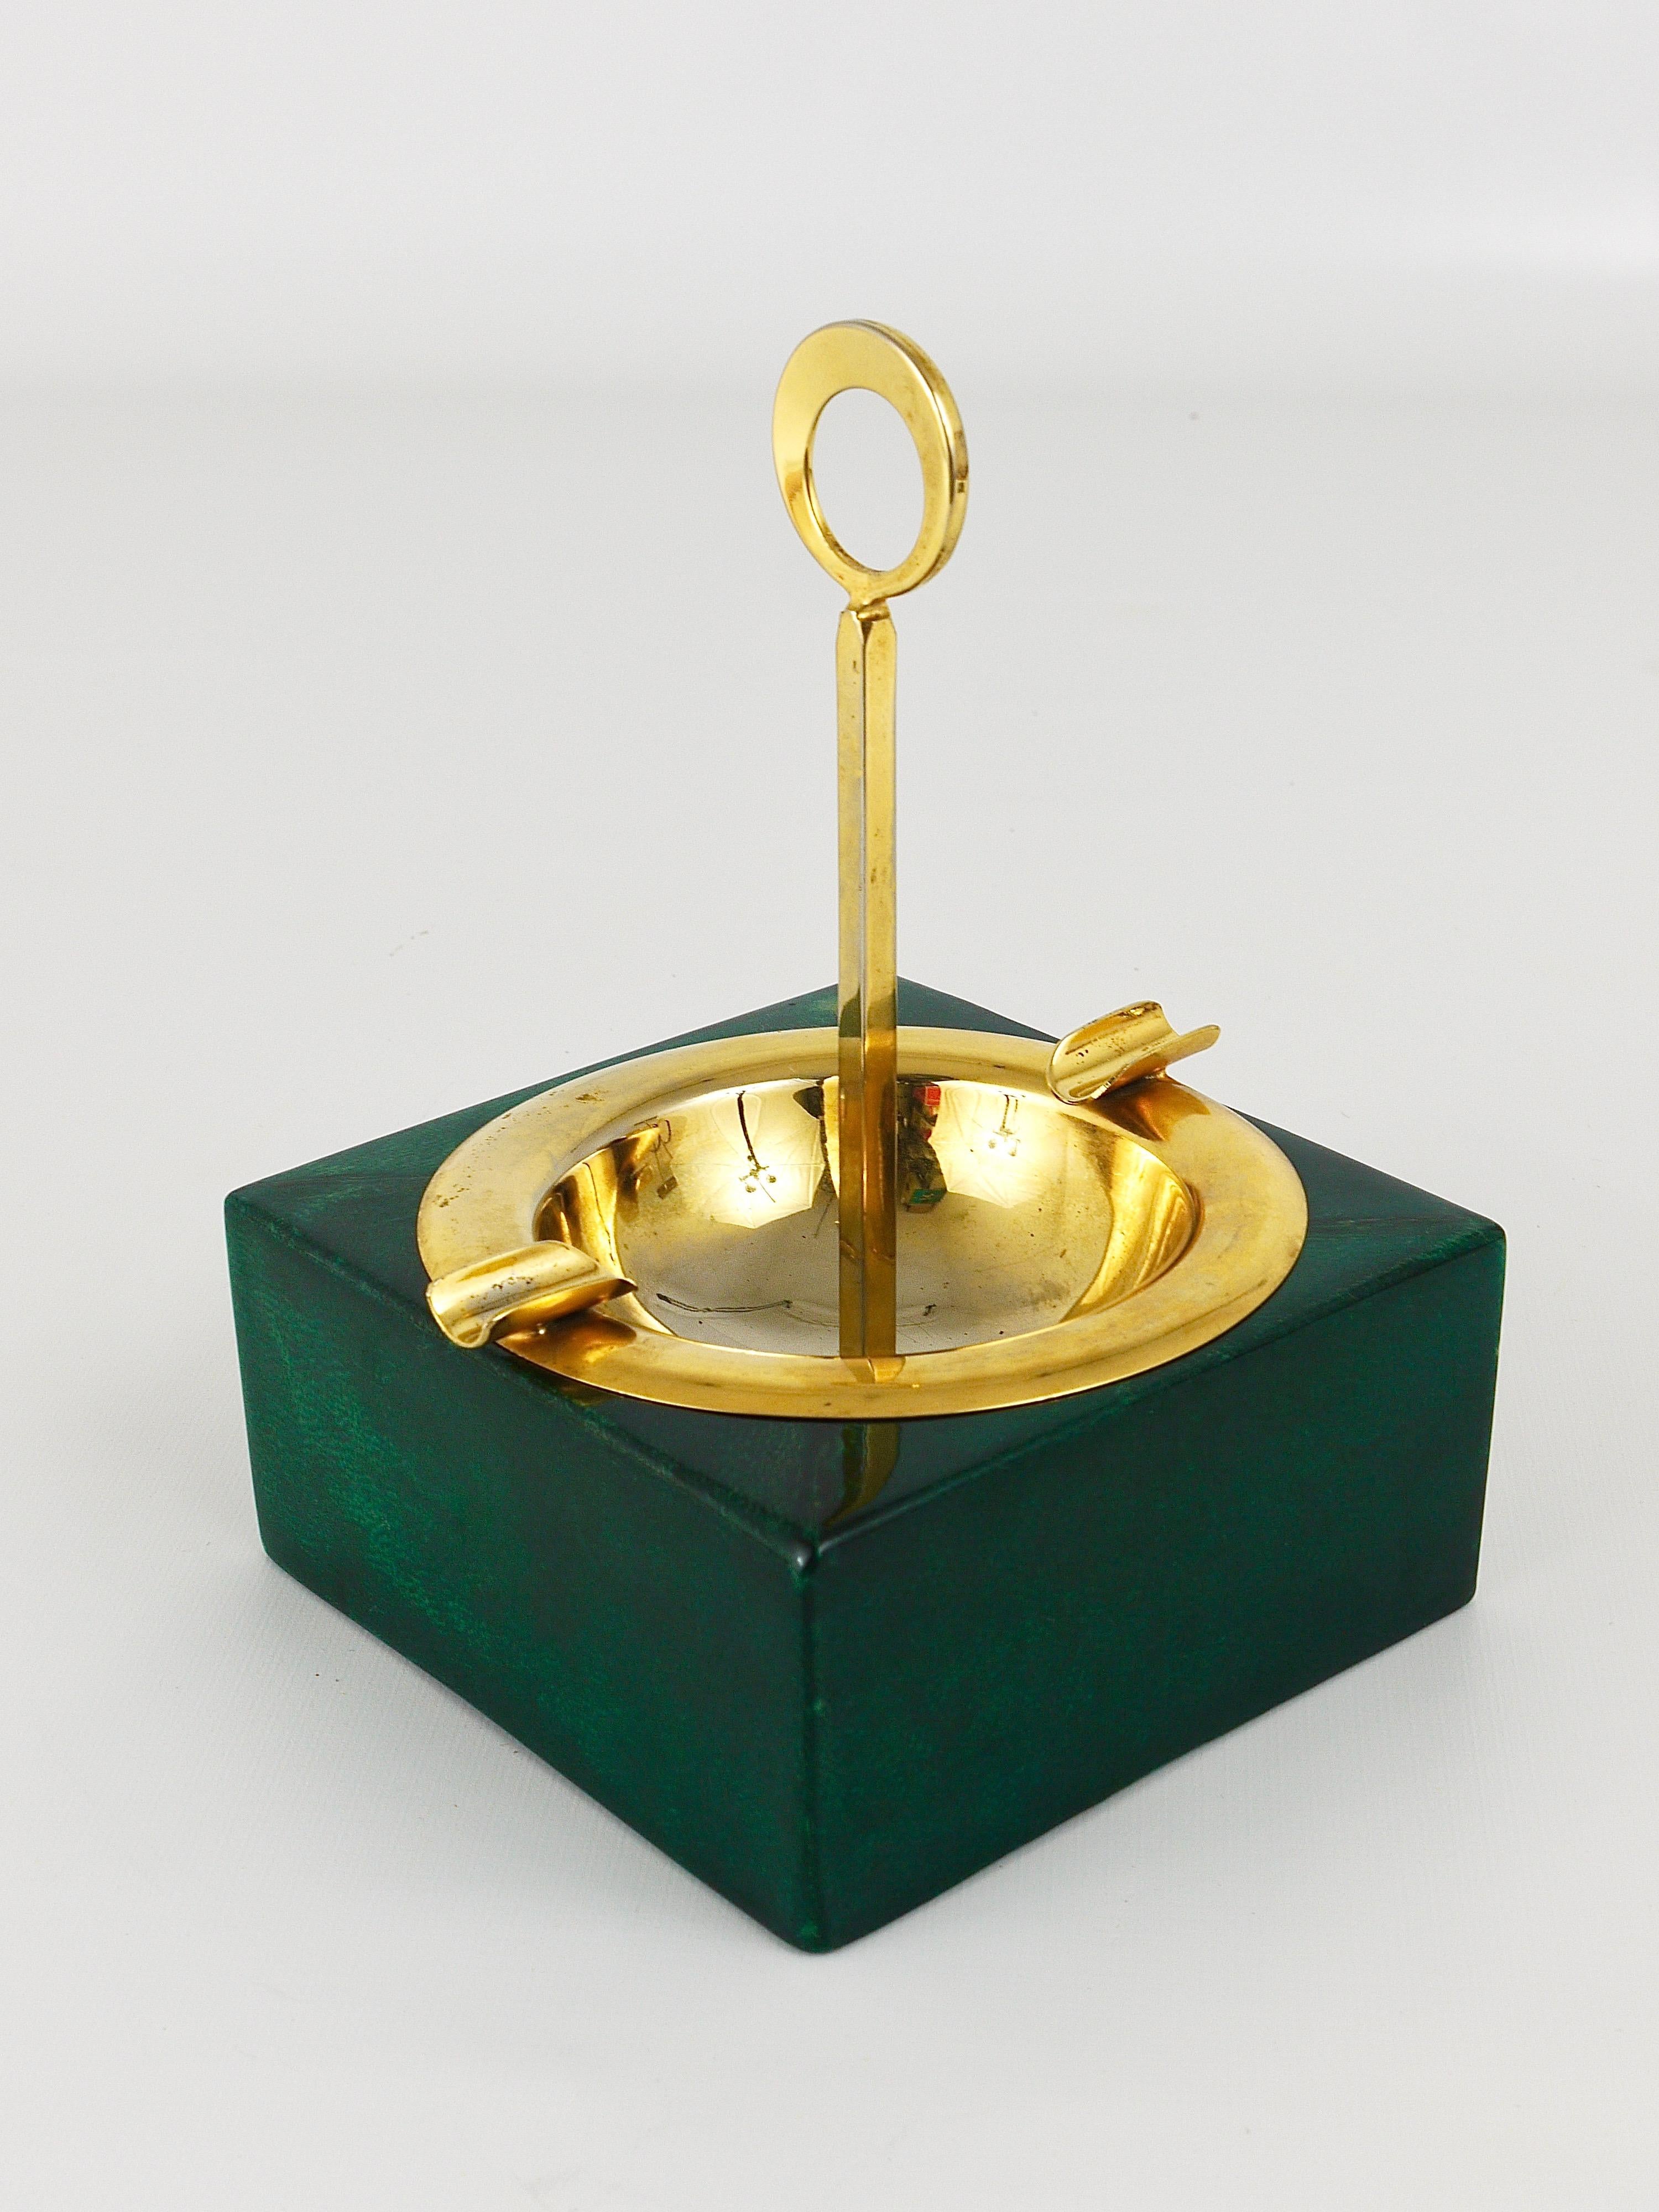 A beautiful modernist ashtray from the 1970s by Aldo Tura, Milano. It has a square wooden base with lacquered green colored goatskin parchment veneer and a gilt metal inlay and handle. In good condition with nice patina.